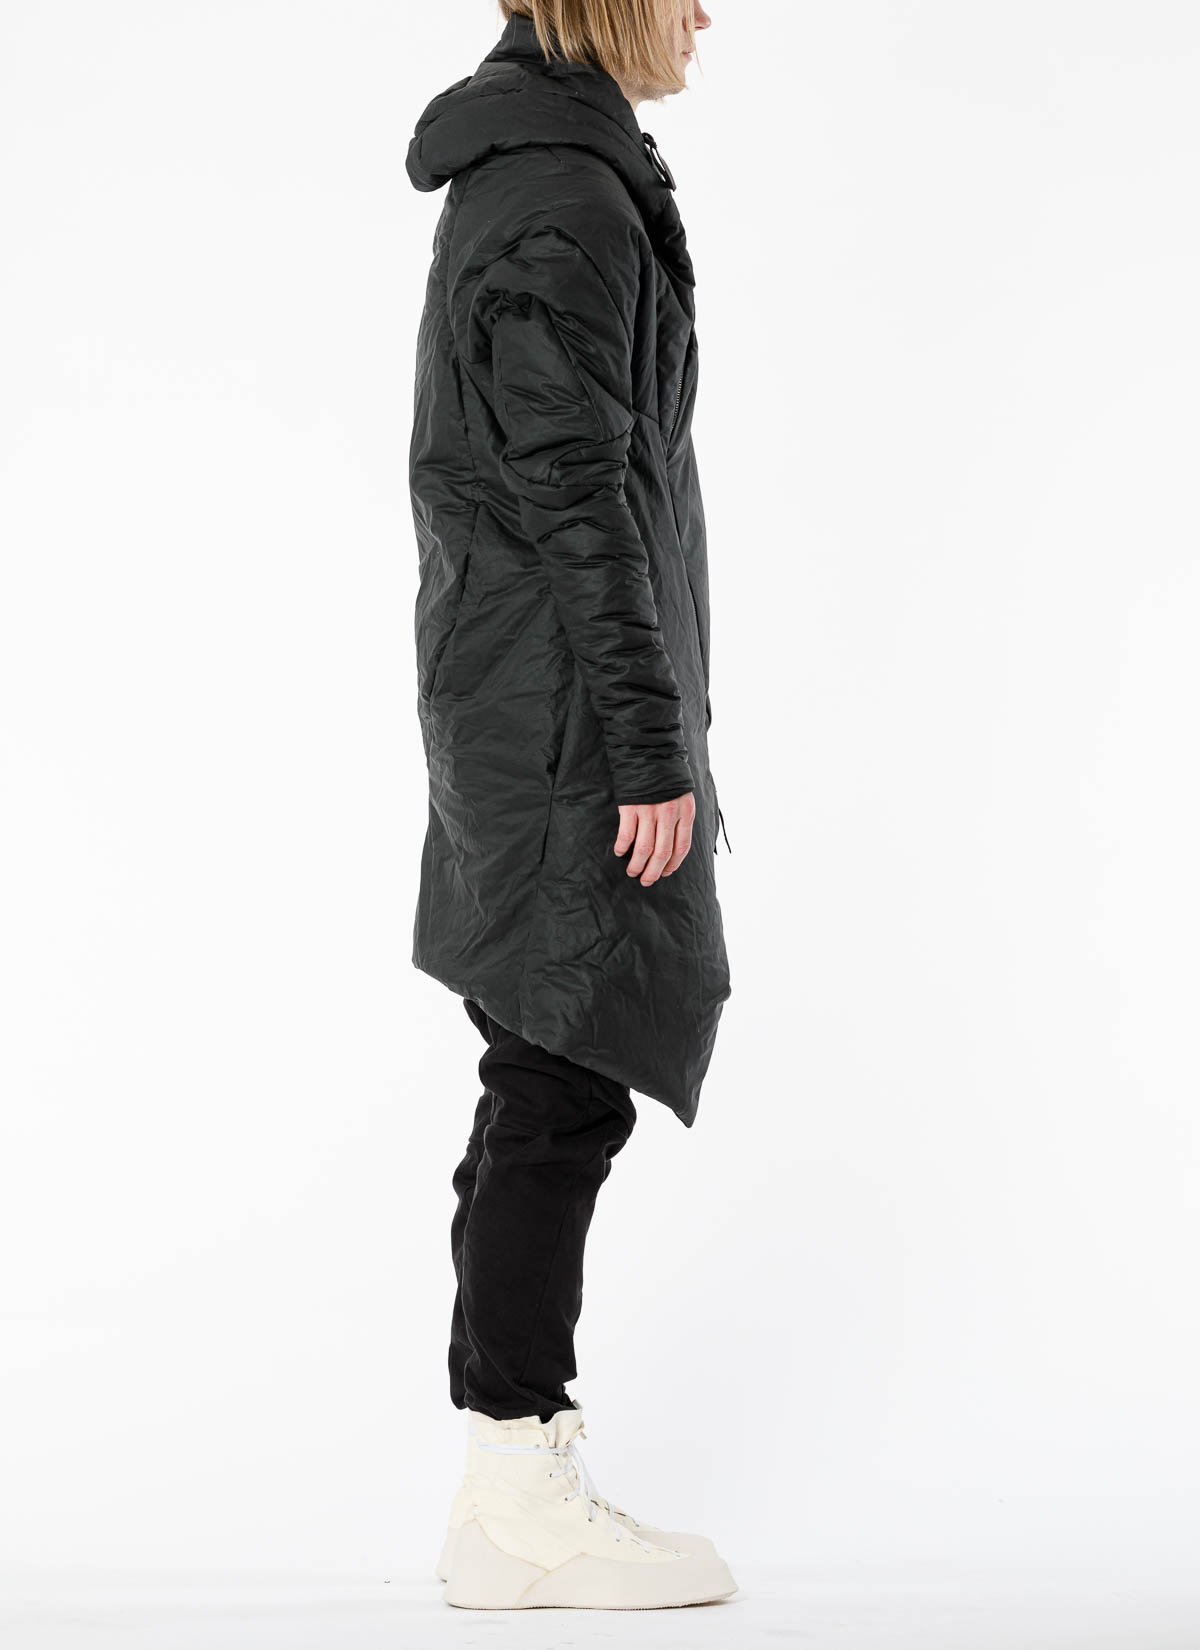 hide-m | LEON EMANUEL BLANCK waxed Hooded Curved Coat, cotton